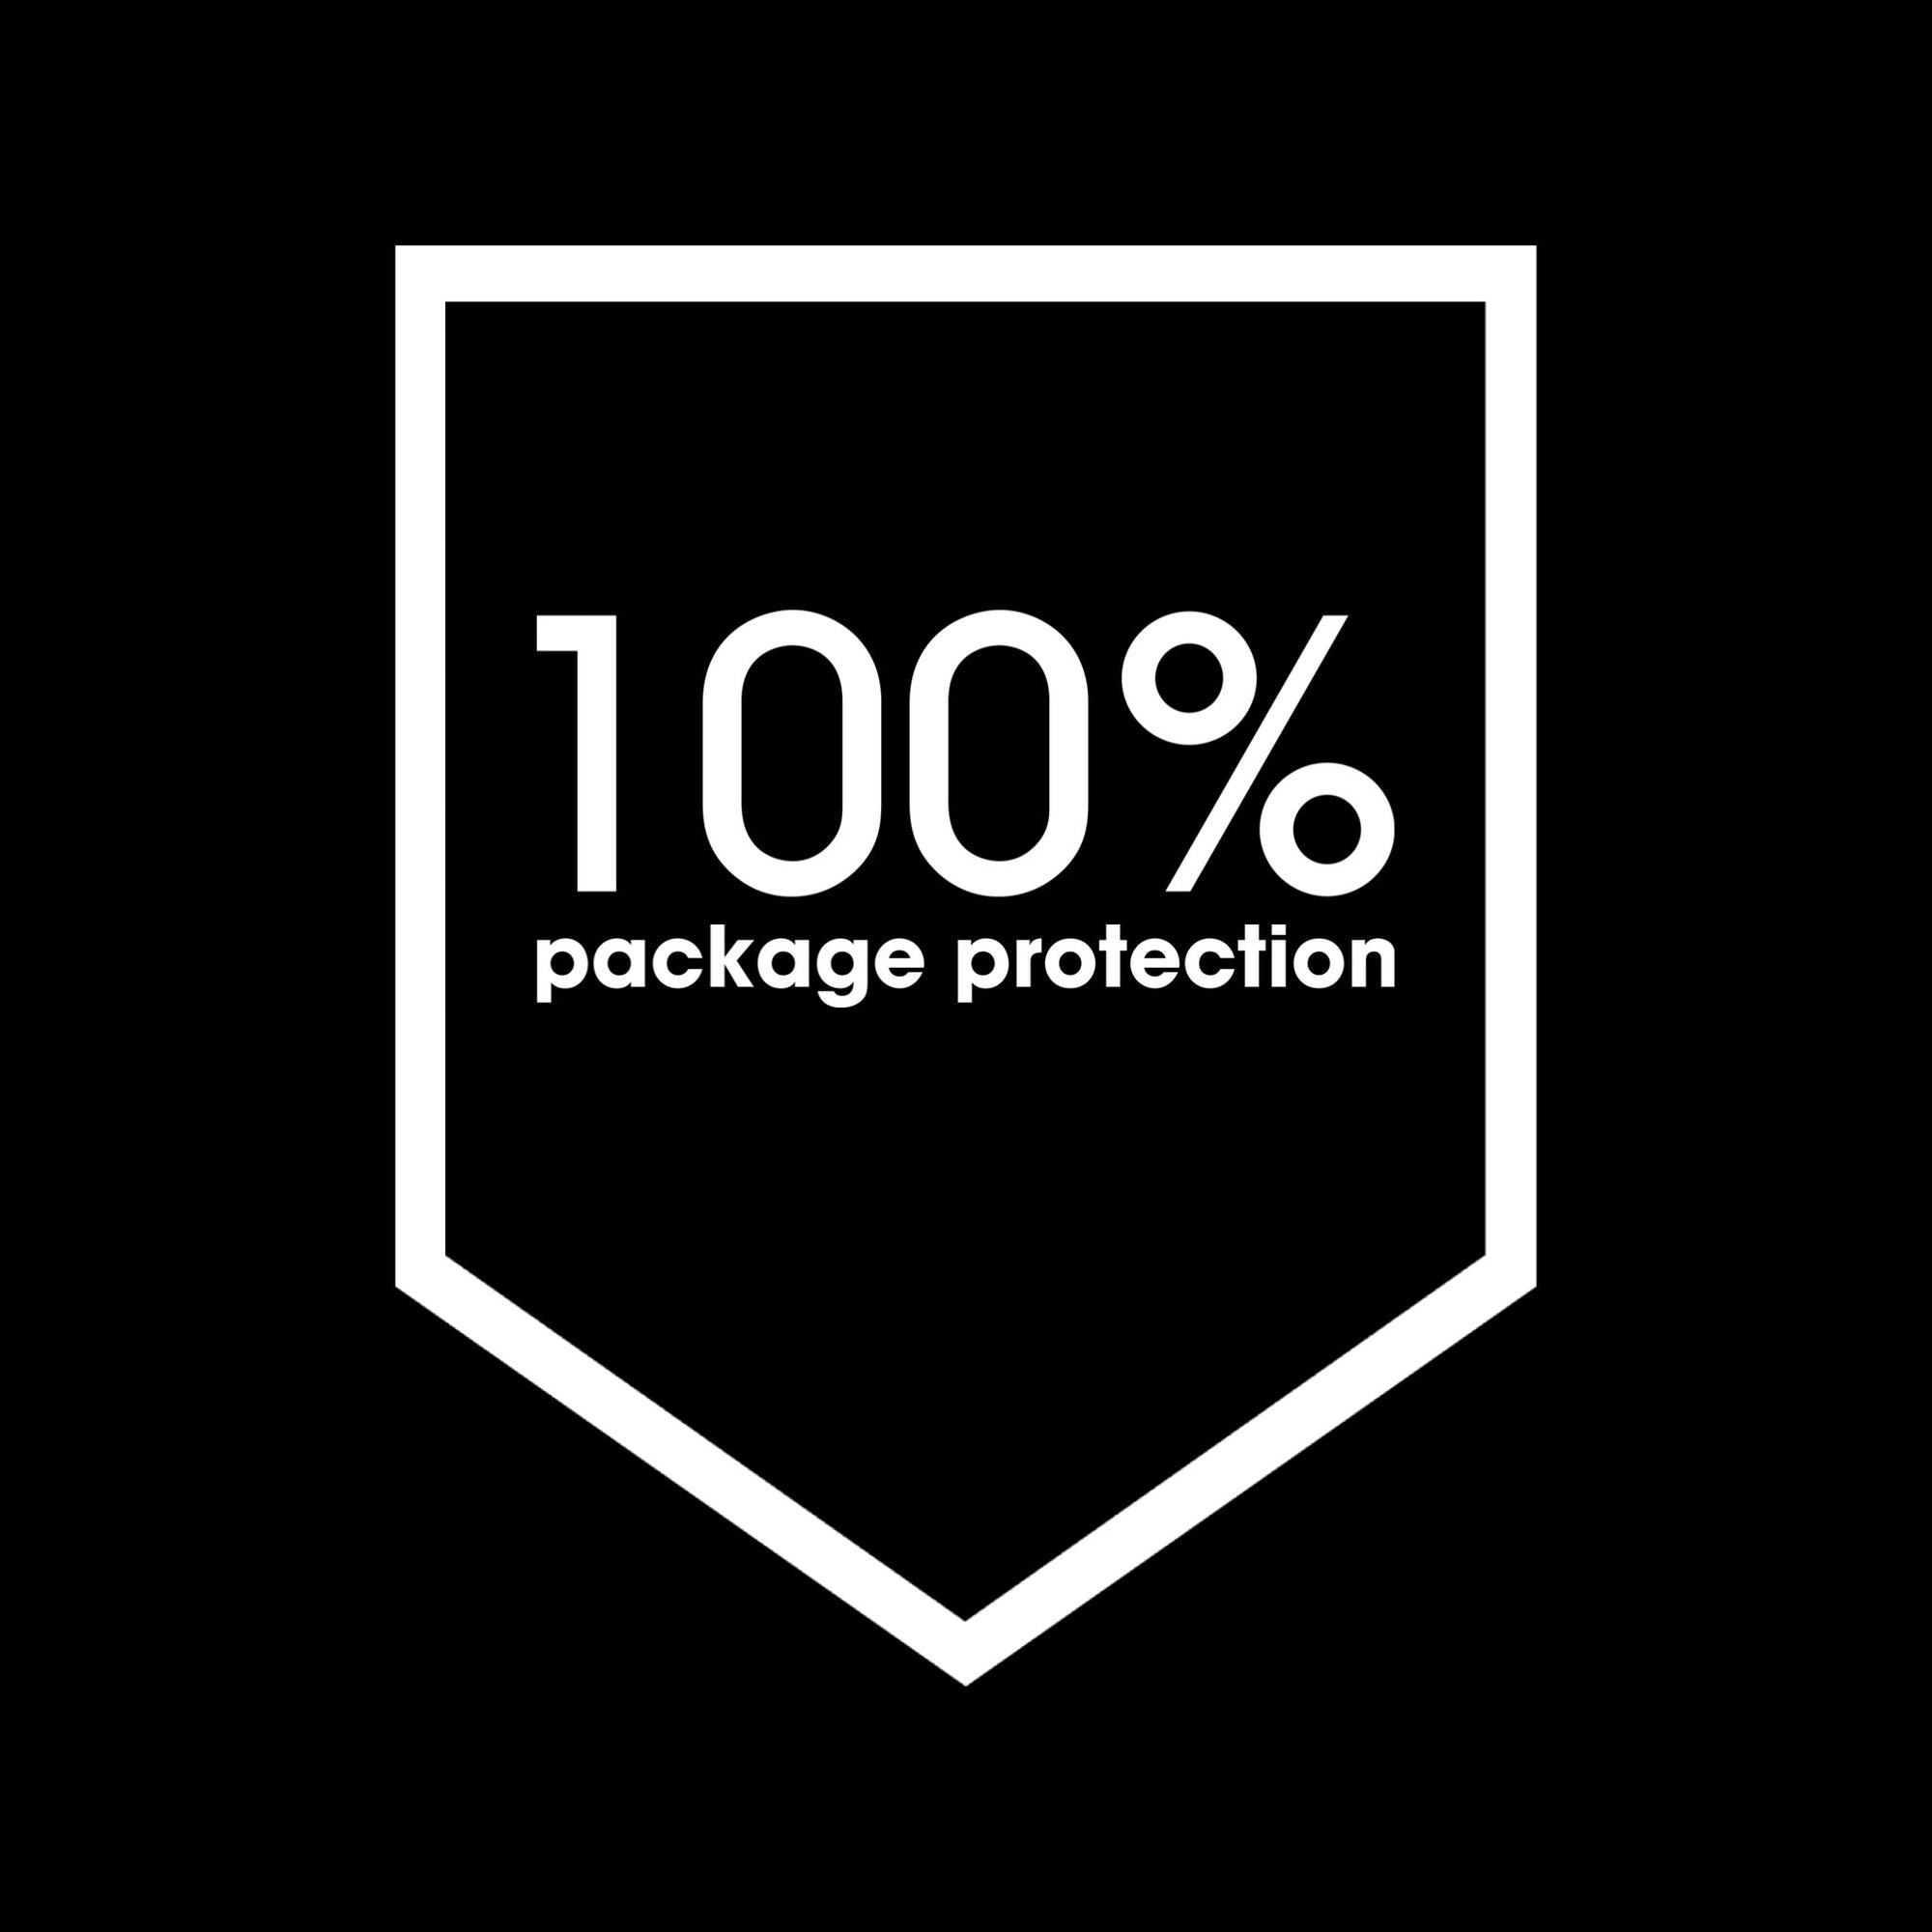 100% package protection